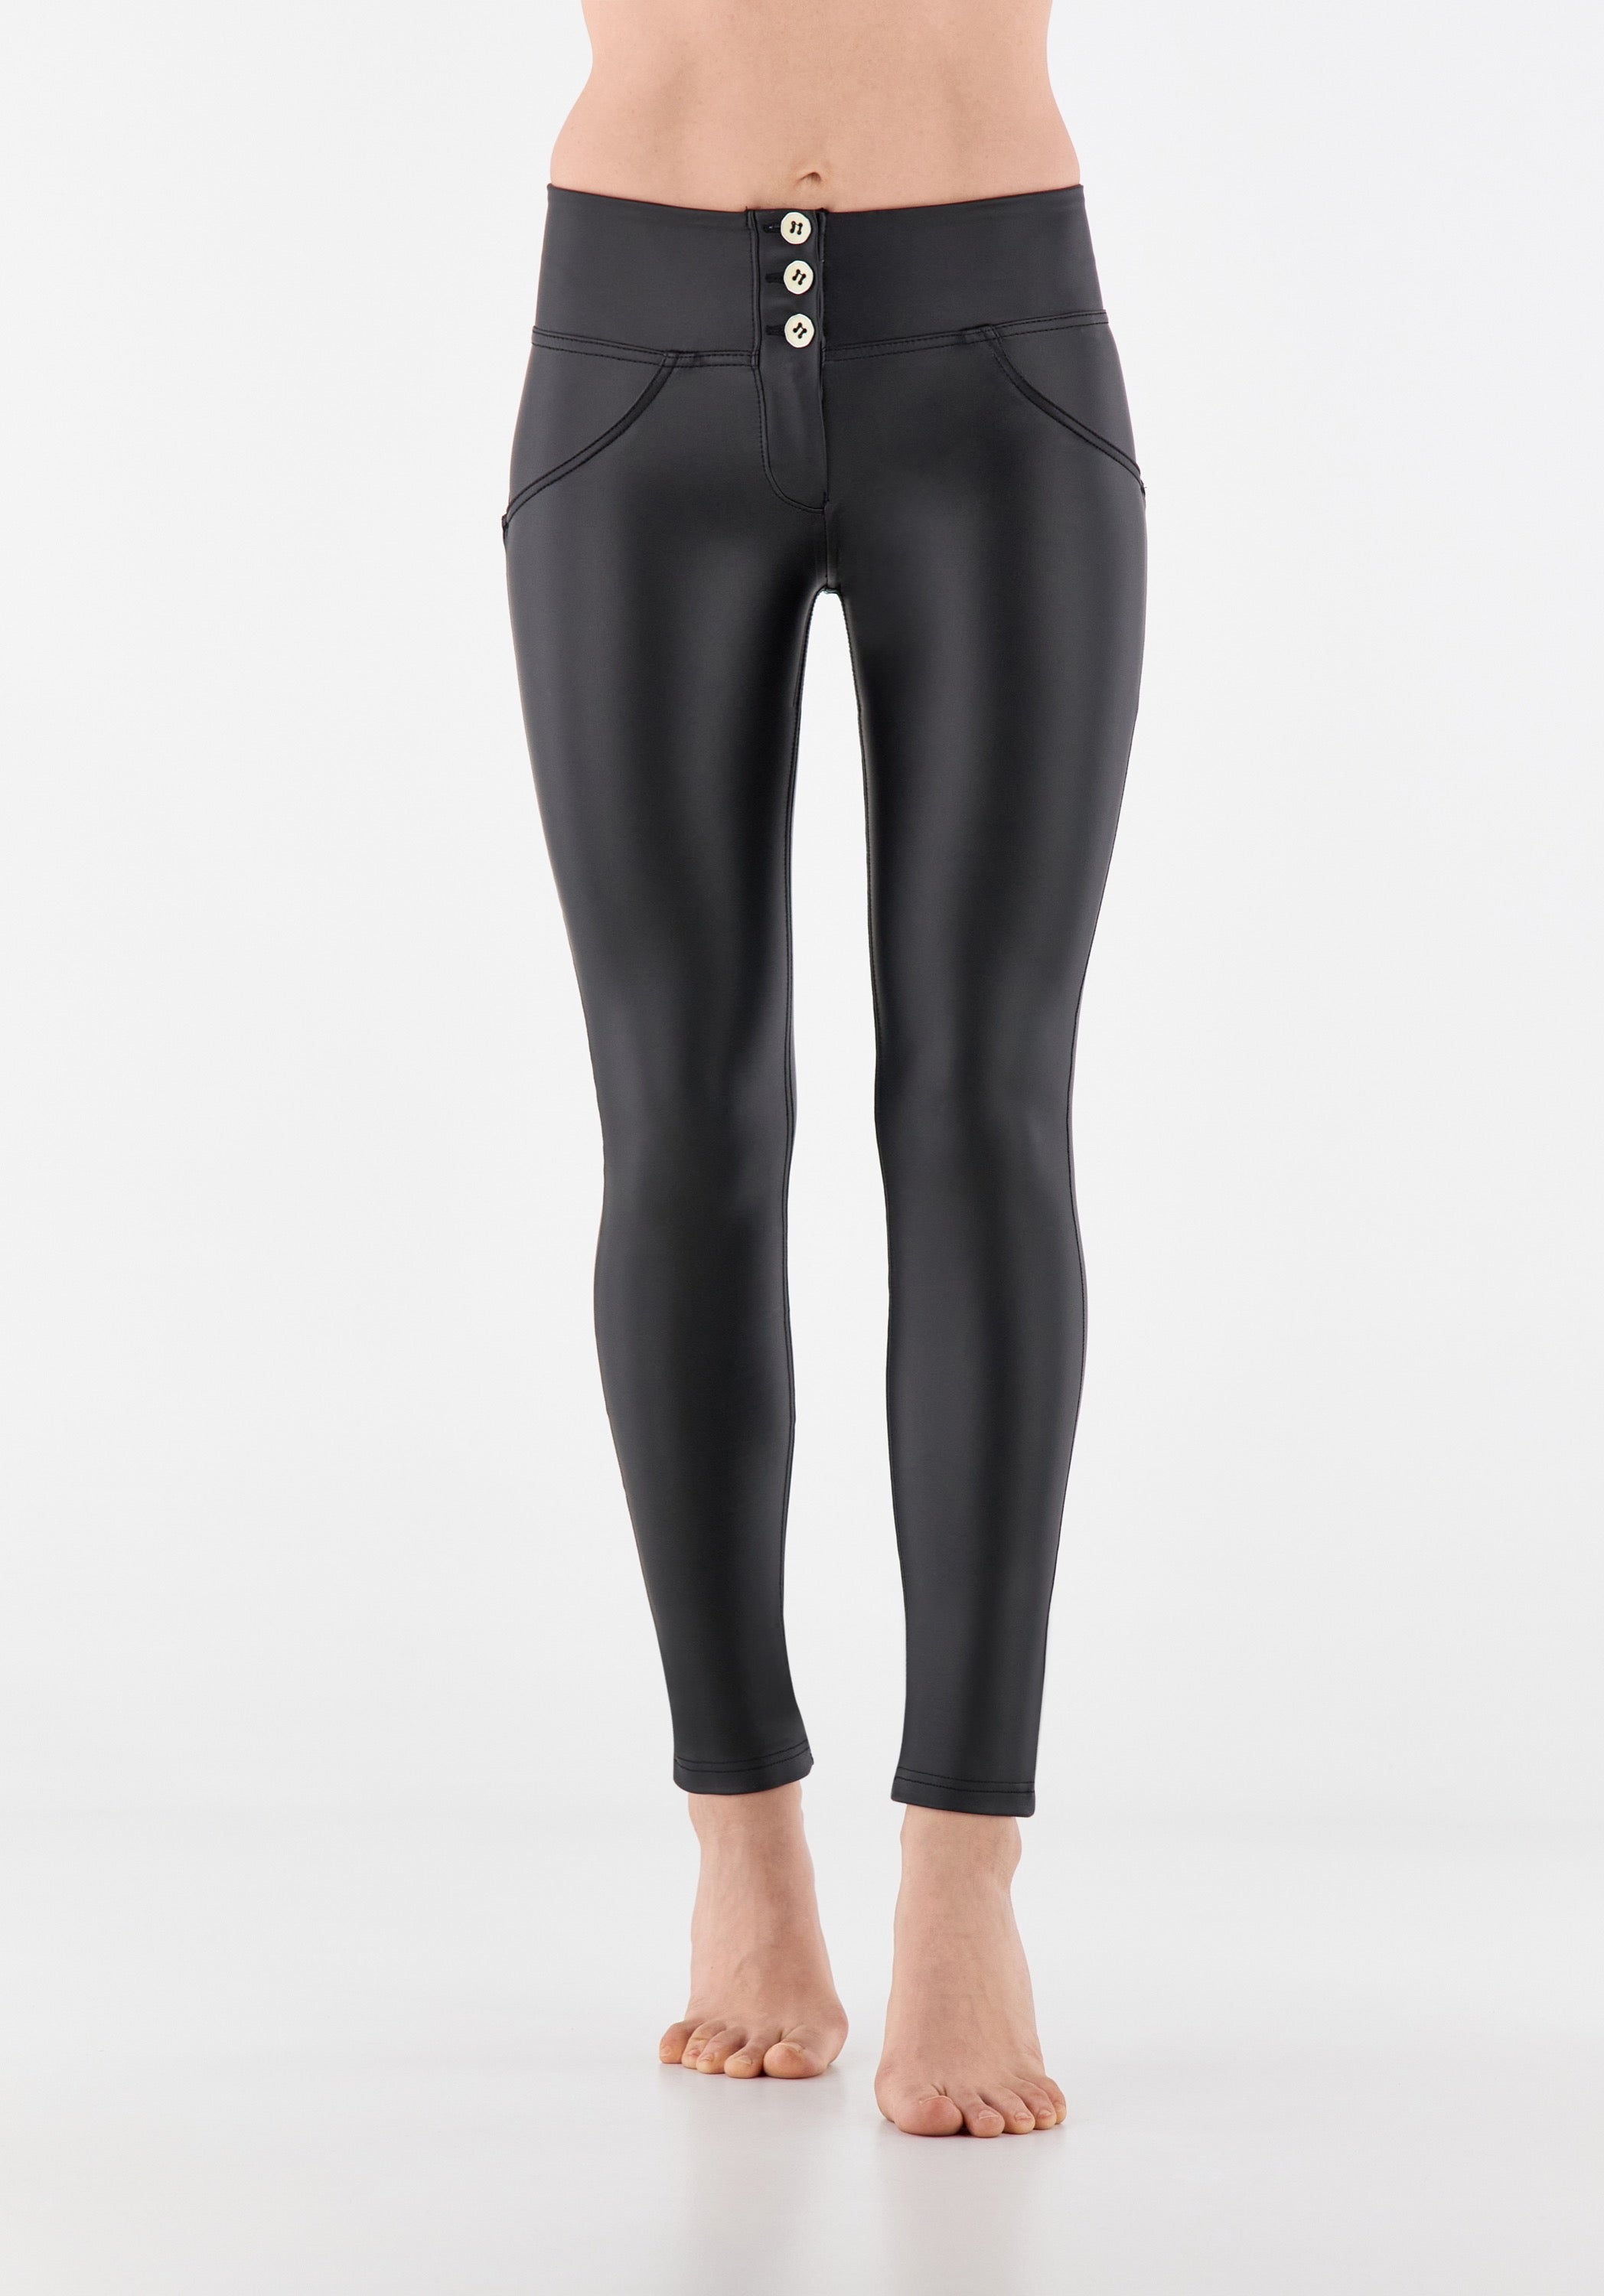 (WRUP1MC006P-N)MID-WAIST WR.UP® BLACK PANTS IN FAUX LEATHER